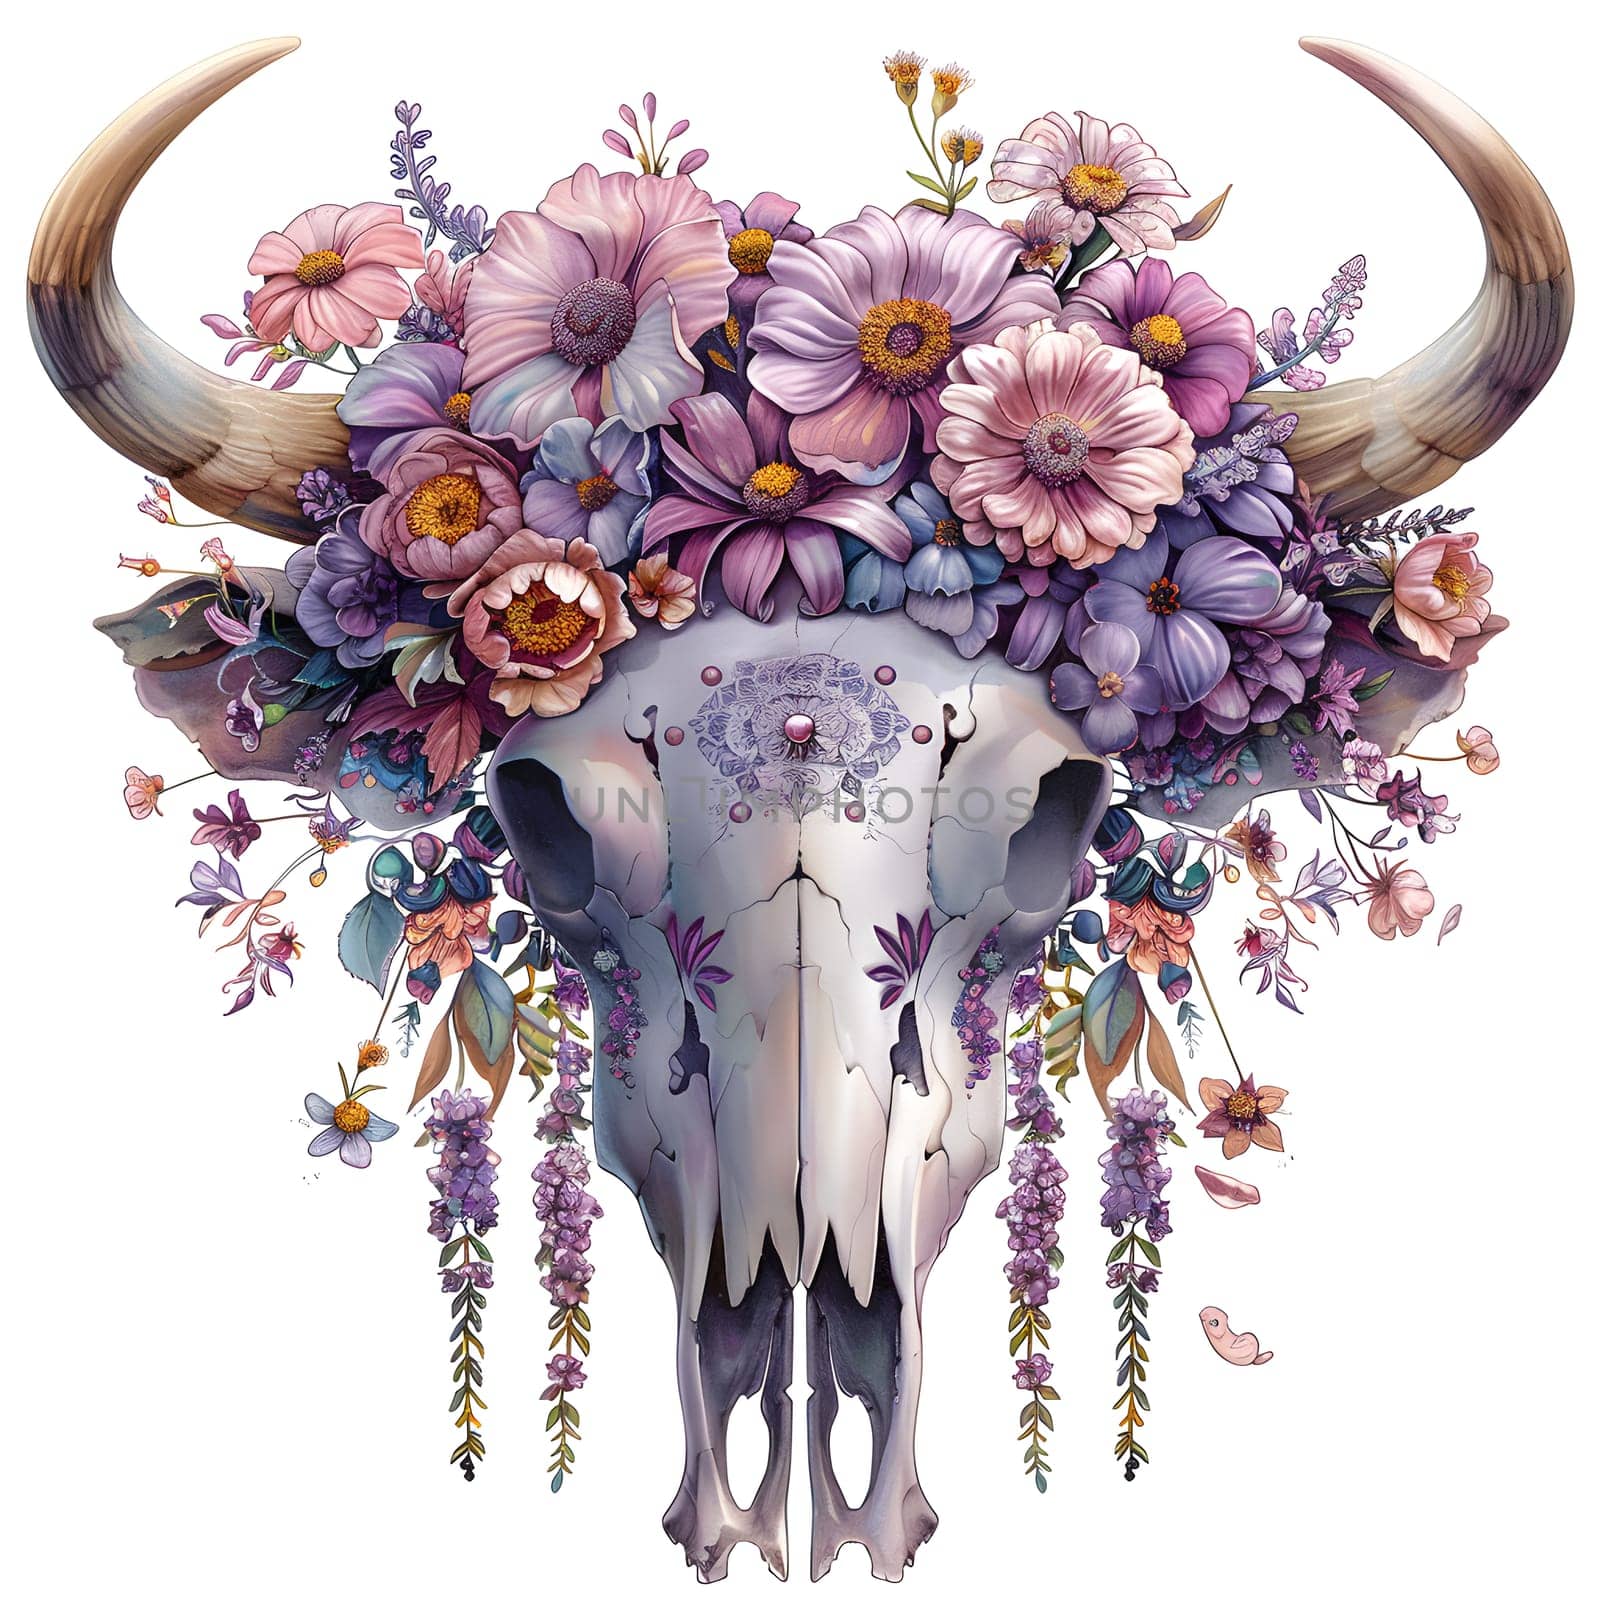 The bull skull is adorned with vibrant purple flowers, a stunning display of floral art on porcelain drinkware that brings a touch of elegance to any space